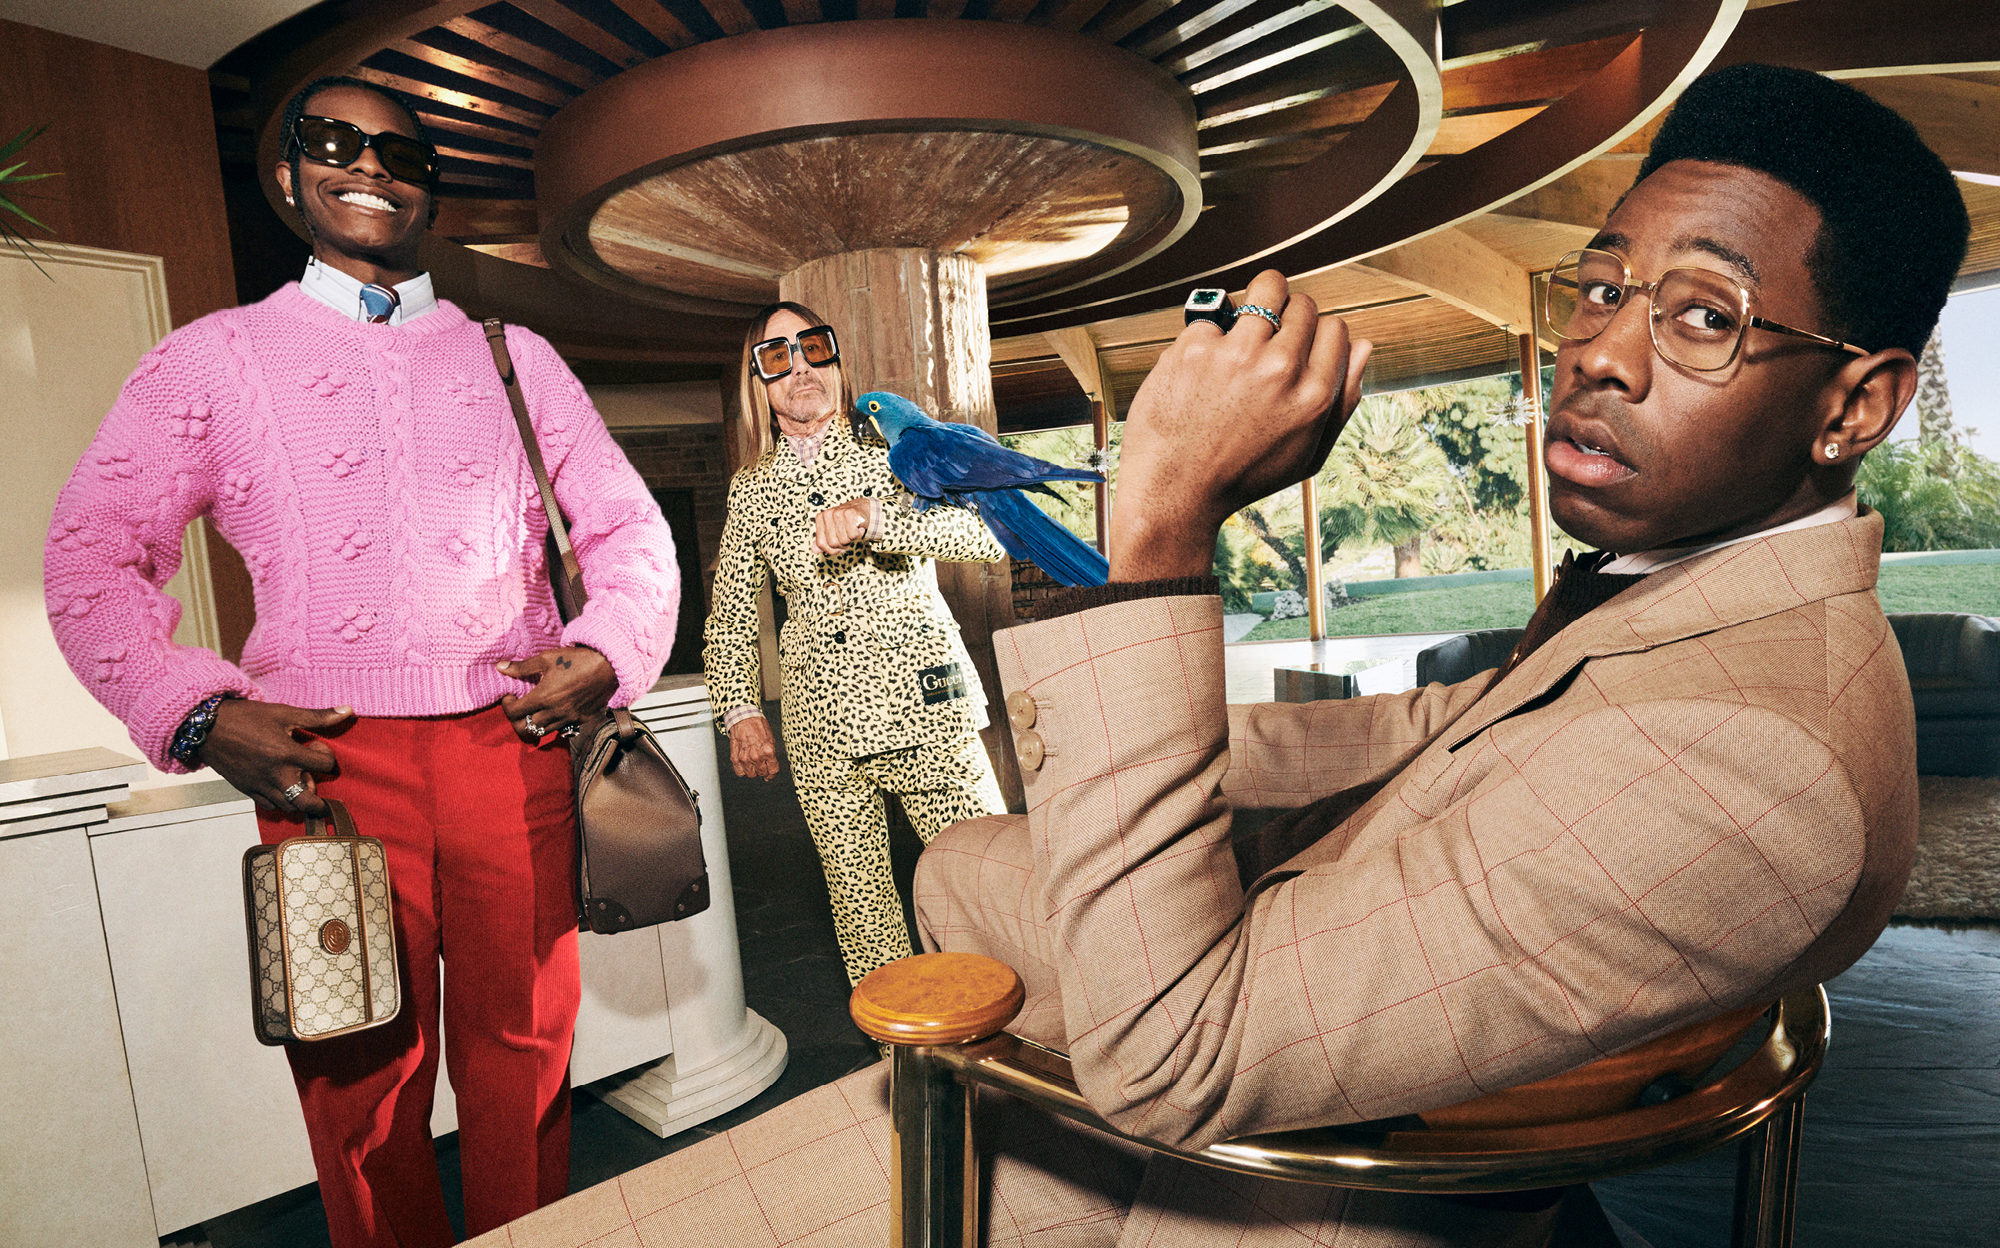 A$AP Rocky, Iggy Pop and Tyler, the Creator hang out in the Hollywood films in Gucci's latest campaign for menswear tailoring